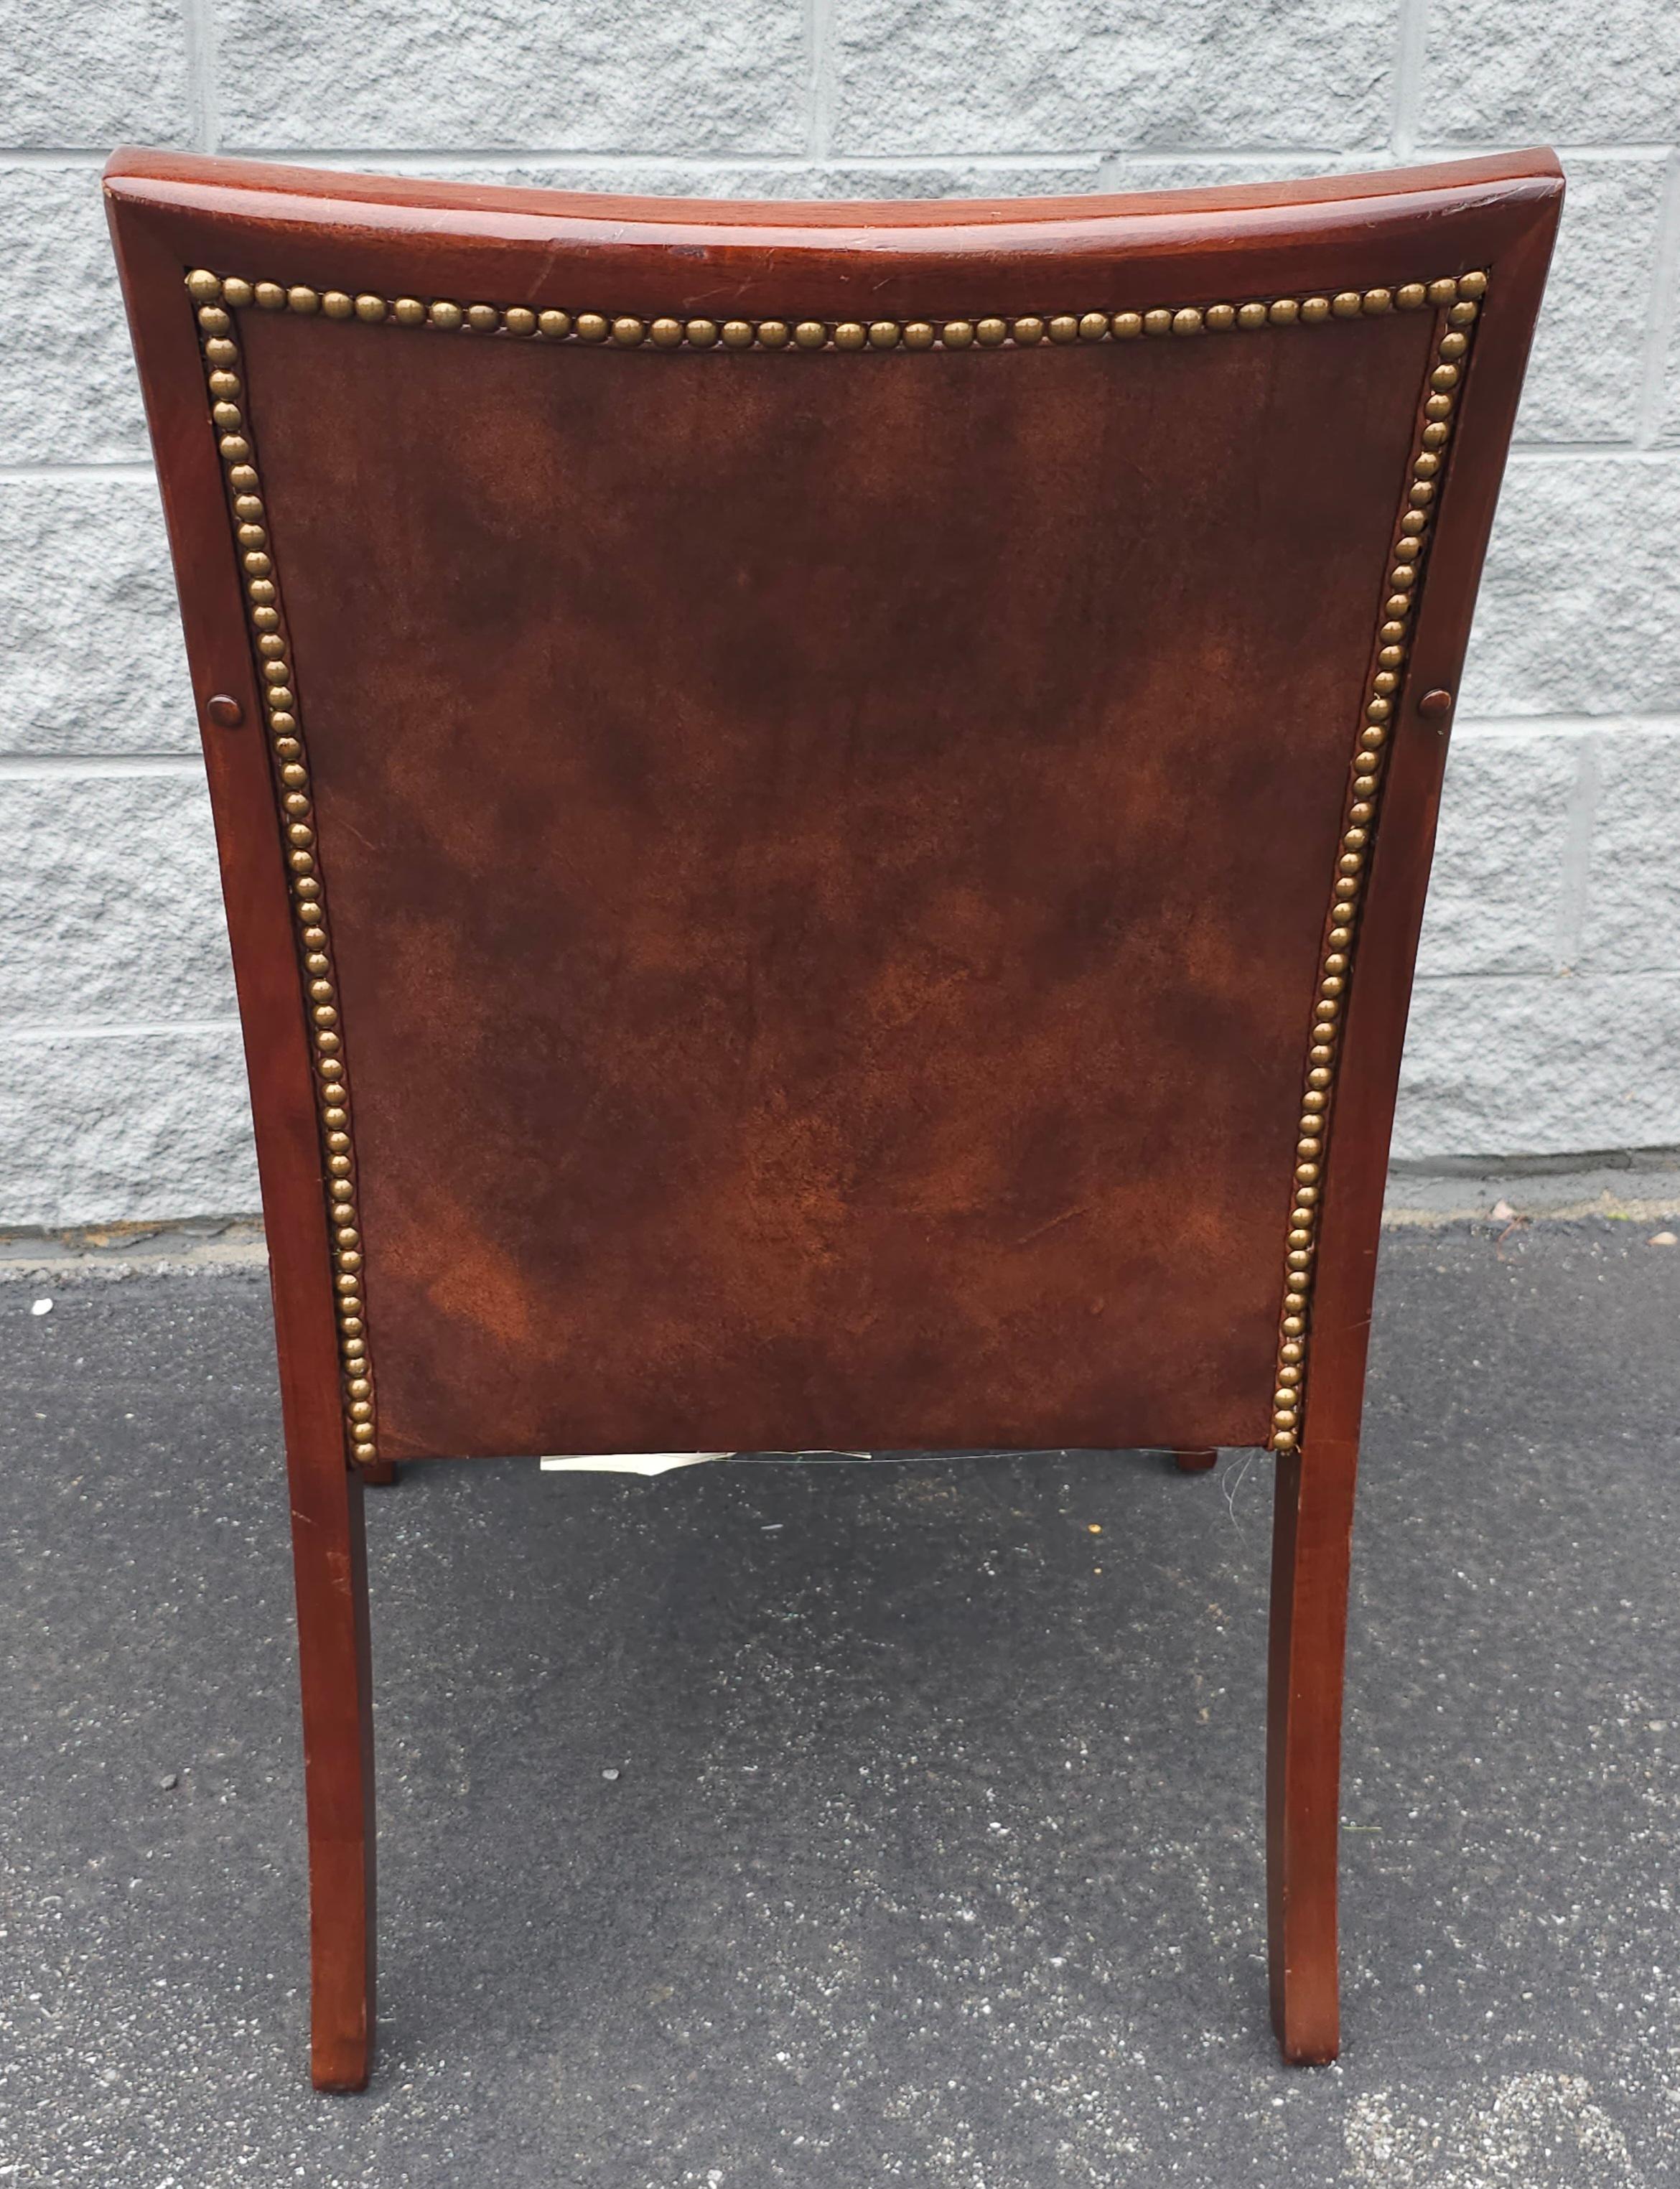 20th Century Stateville Chair Co. Mahogany and Leather Upholstered Armchair  For Sale 1